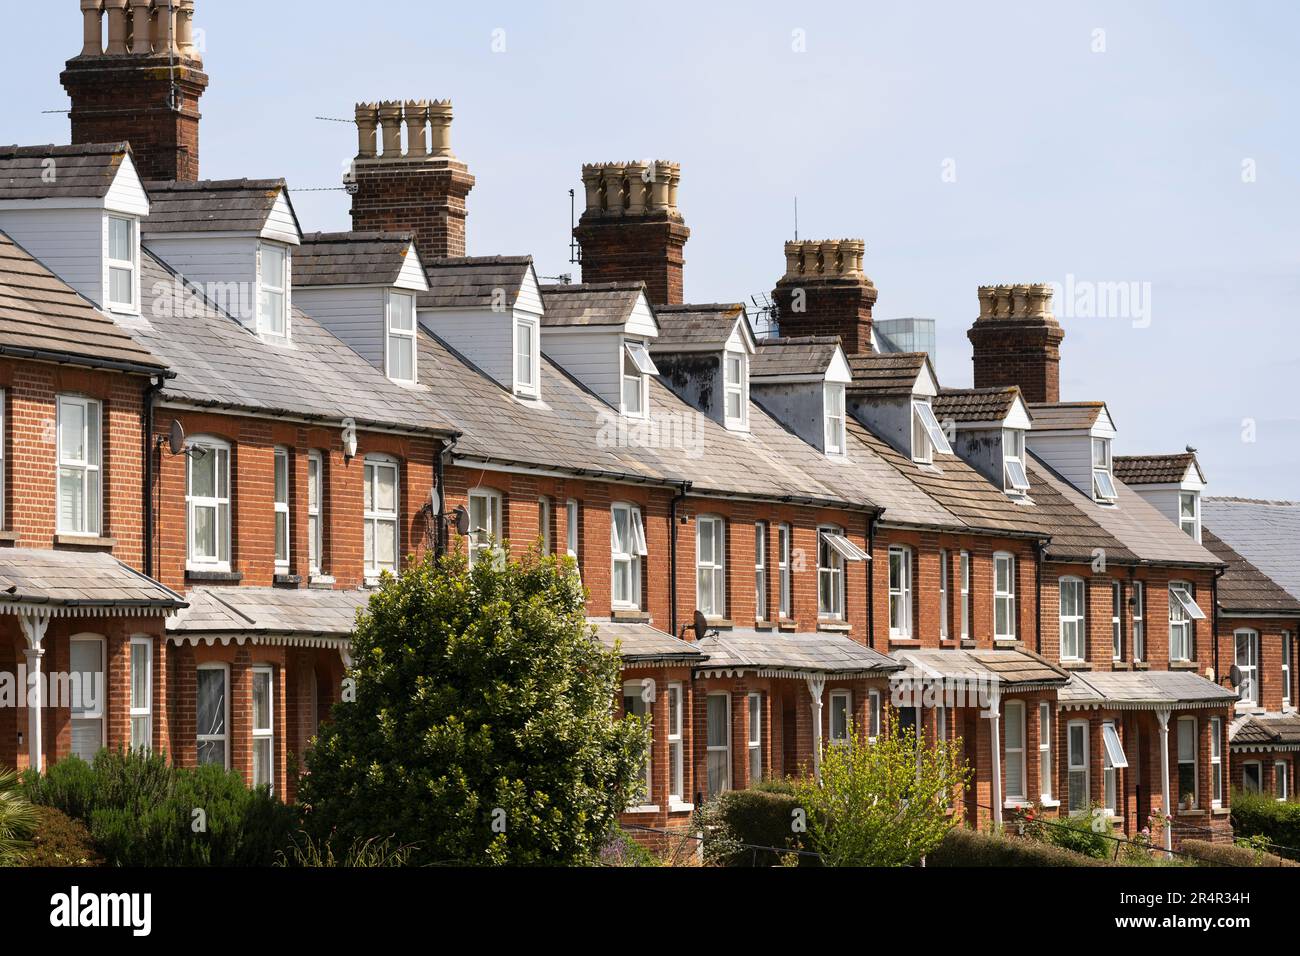 Victorian terraced housing on Worting Road, Basingstoke, UK. Concept: England housing market, mortgage deals, property prices, buy to let Stock Photo